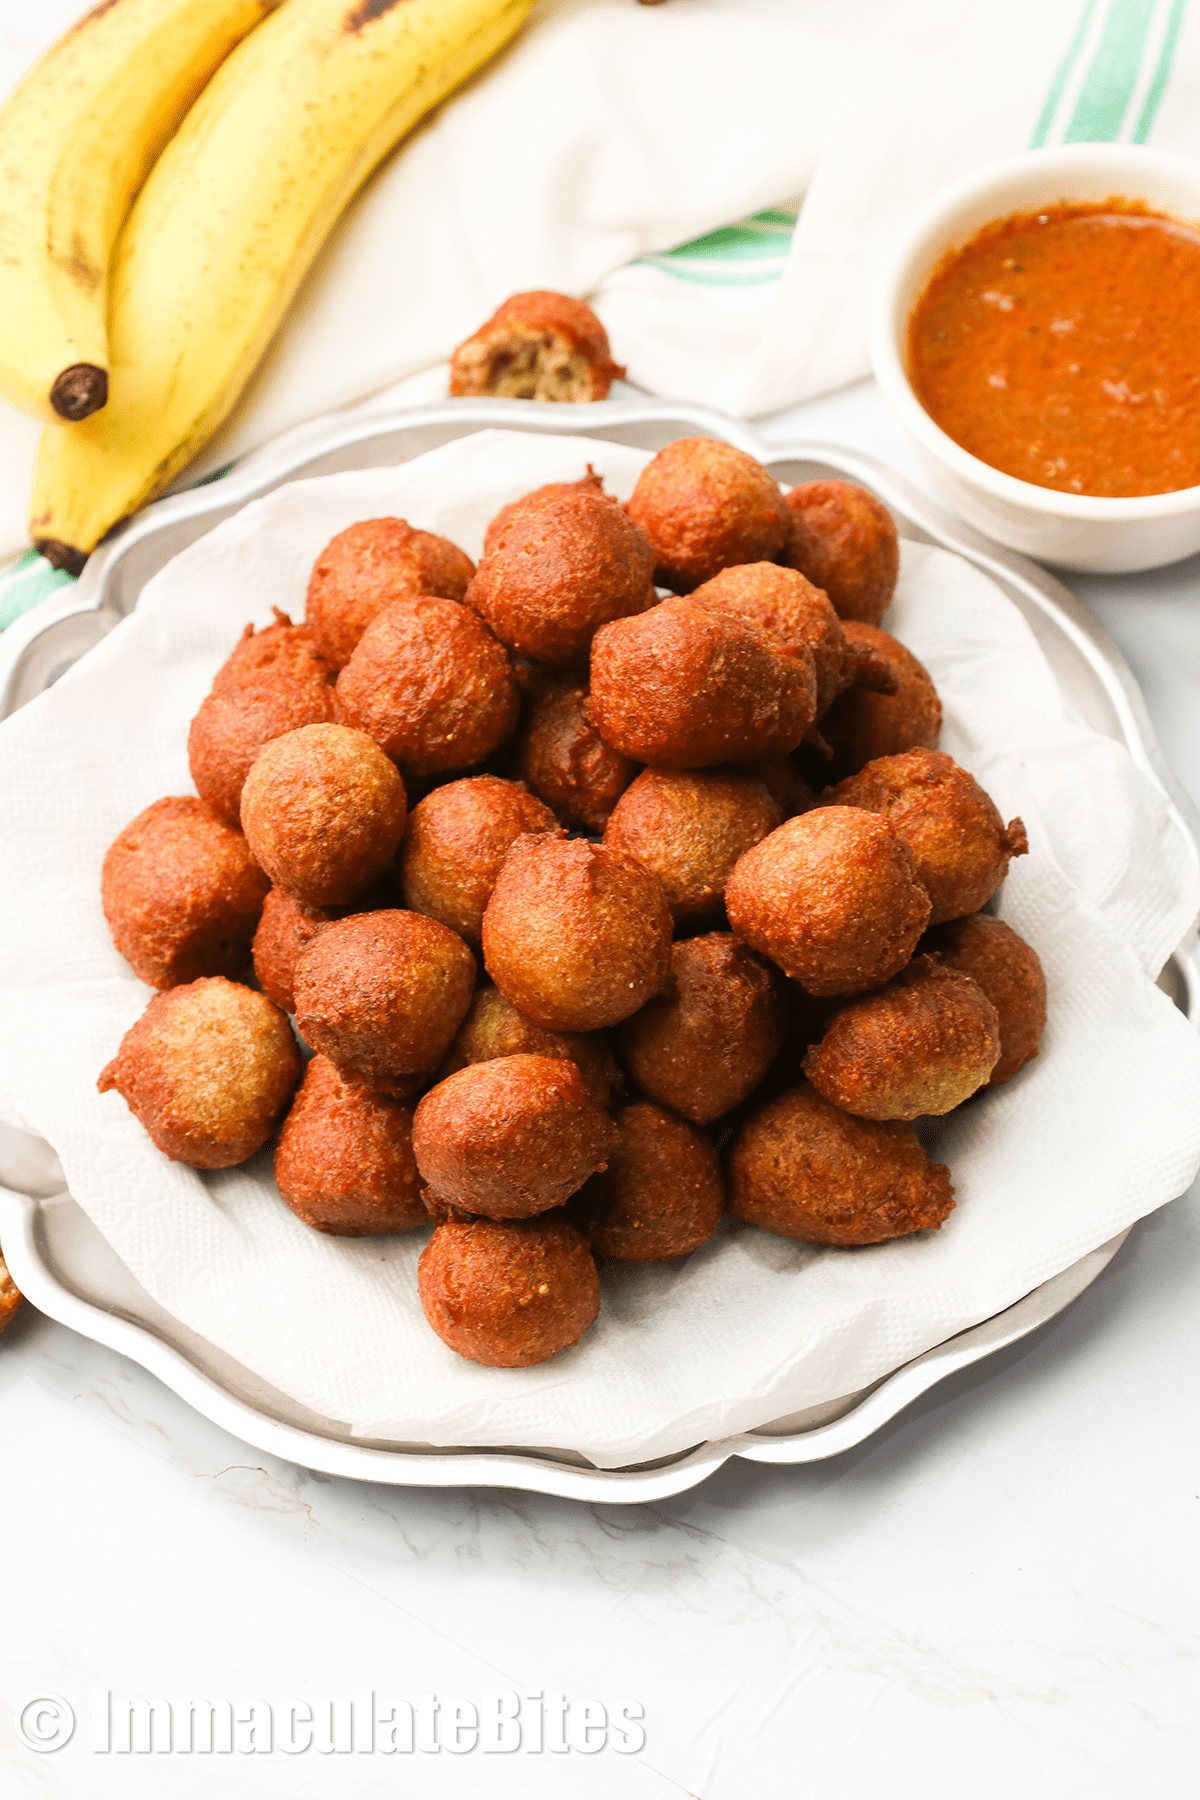 Banana fritters with fresh bananas and delicious sauce